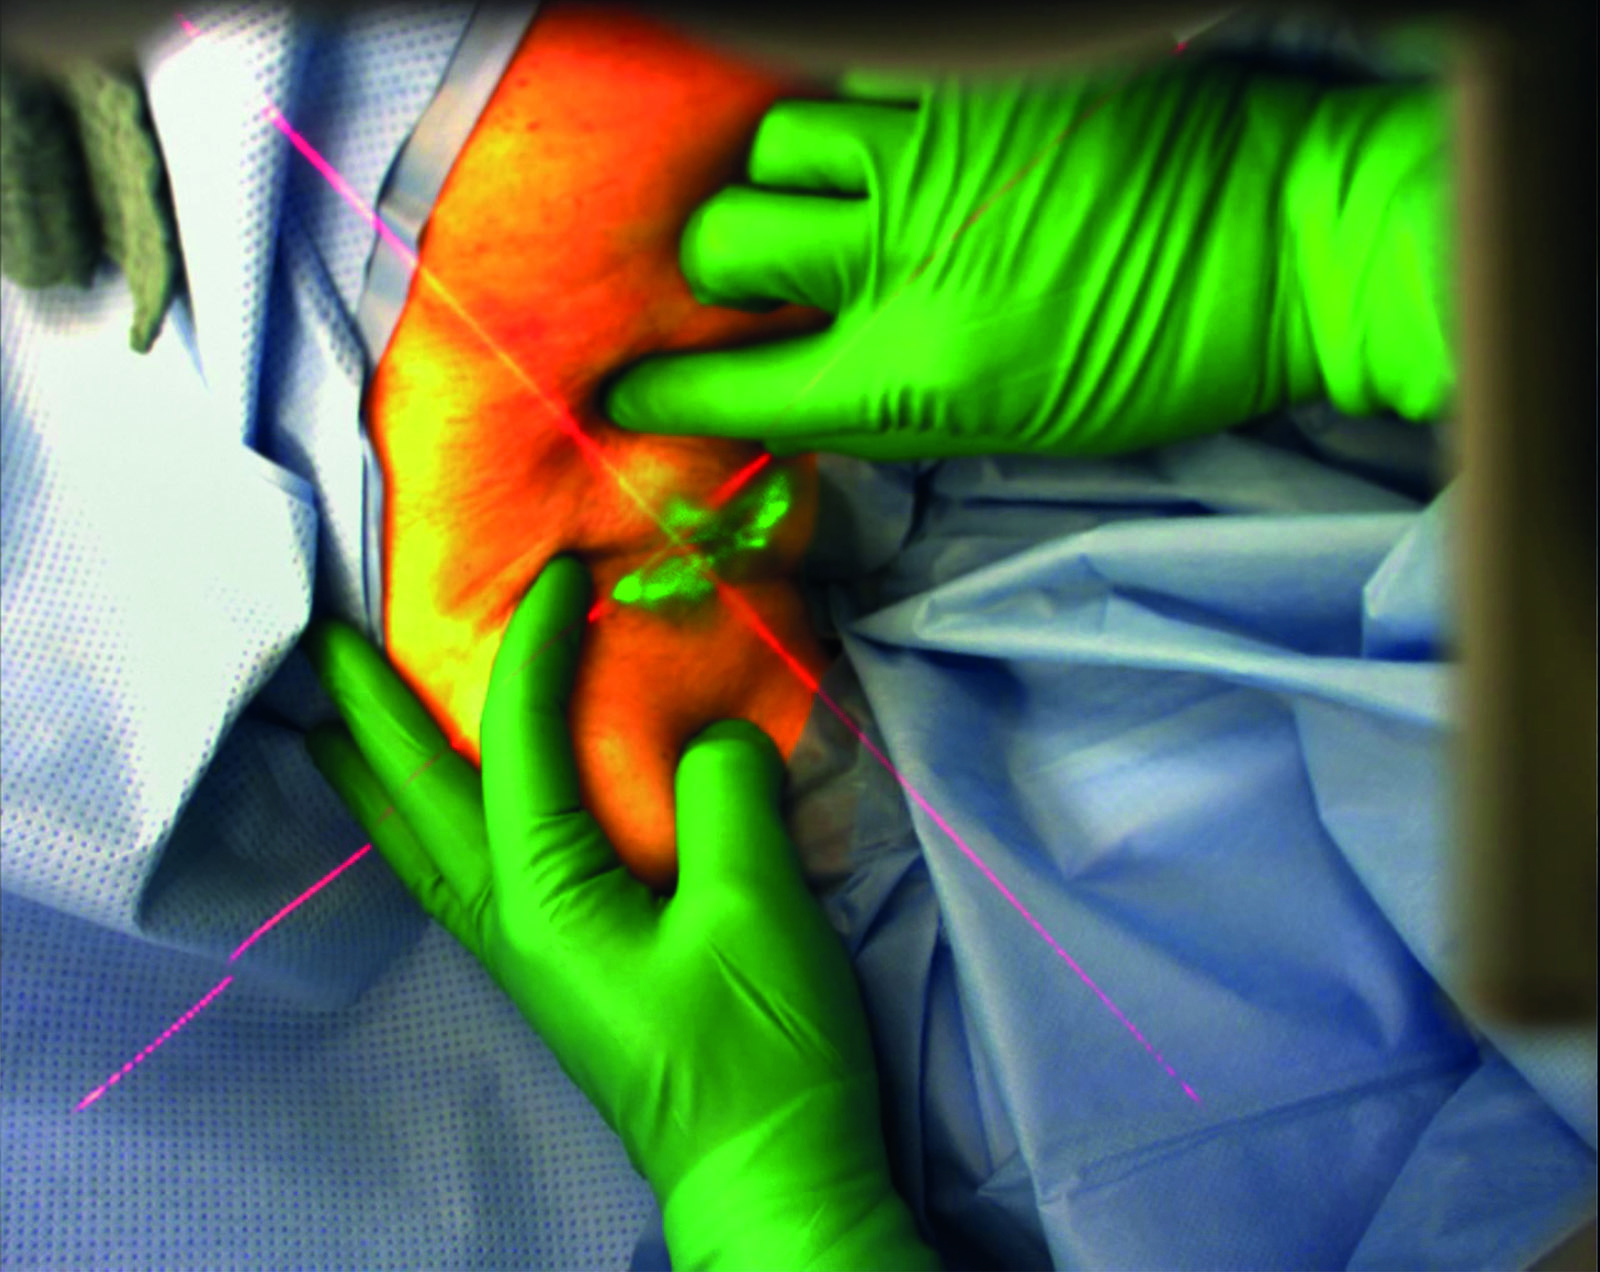 AR glasses enable the doctor to precisely locate the site of the lymph node during surgery. 